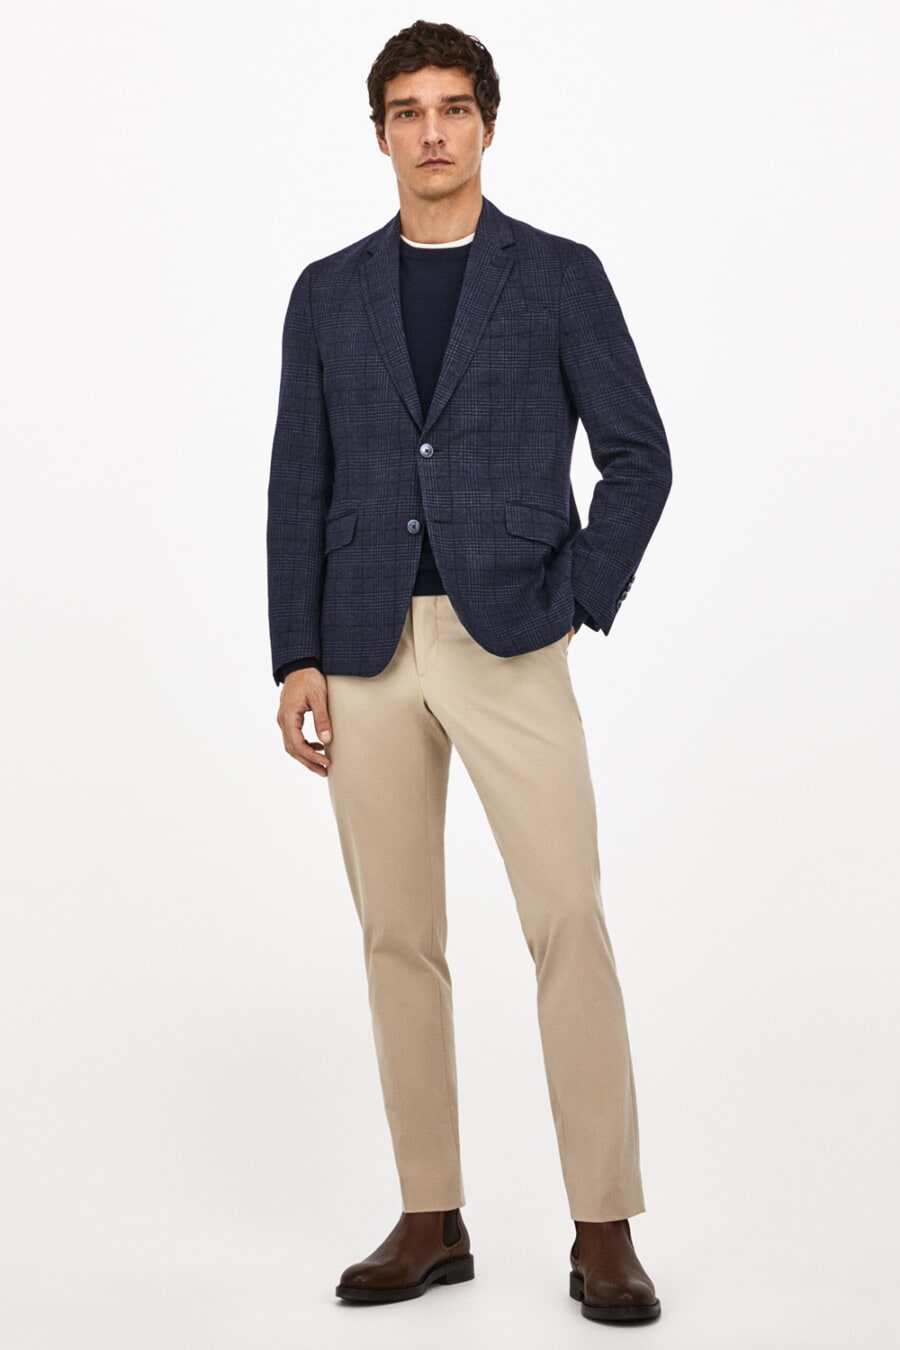 Men's Navy check blazer, khaki chinos, navy sweater and brown leather Chelsea boots outfit